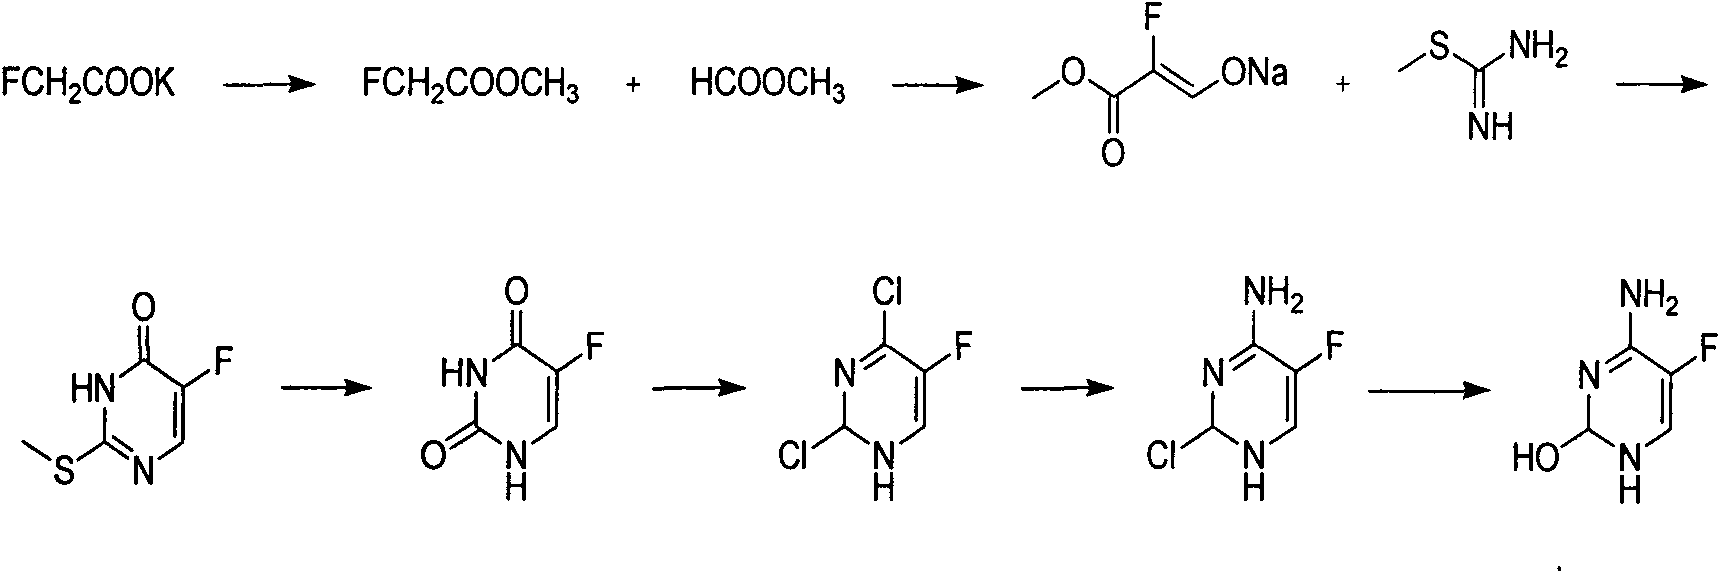 Novel technology for synthesis of 5-flucytosine